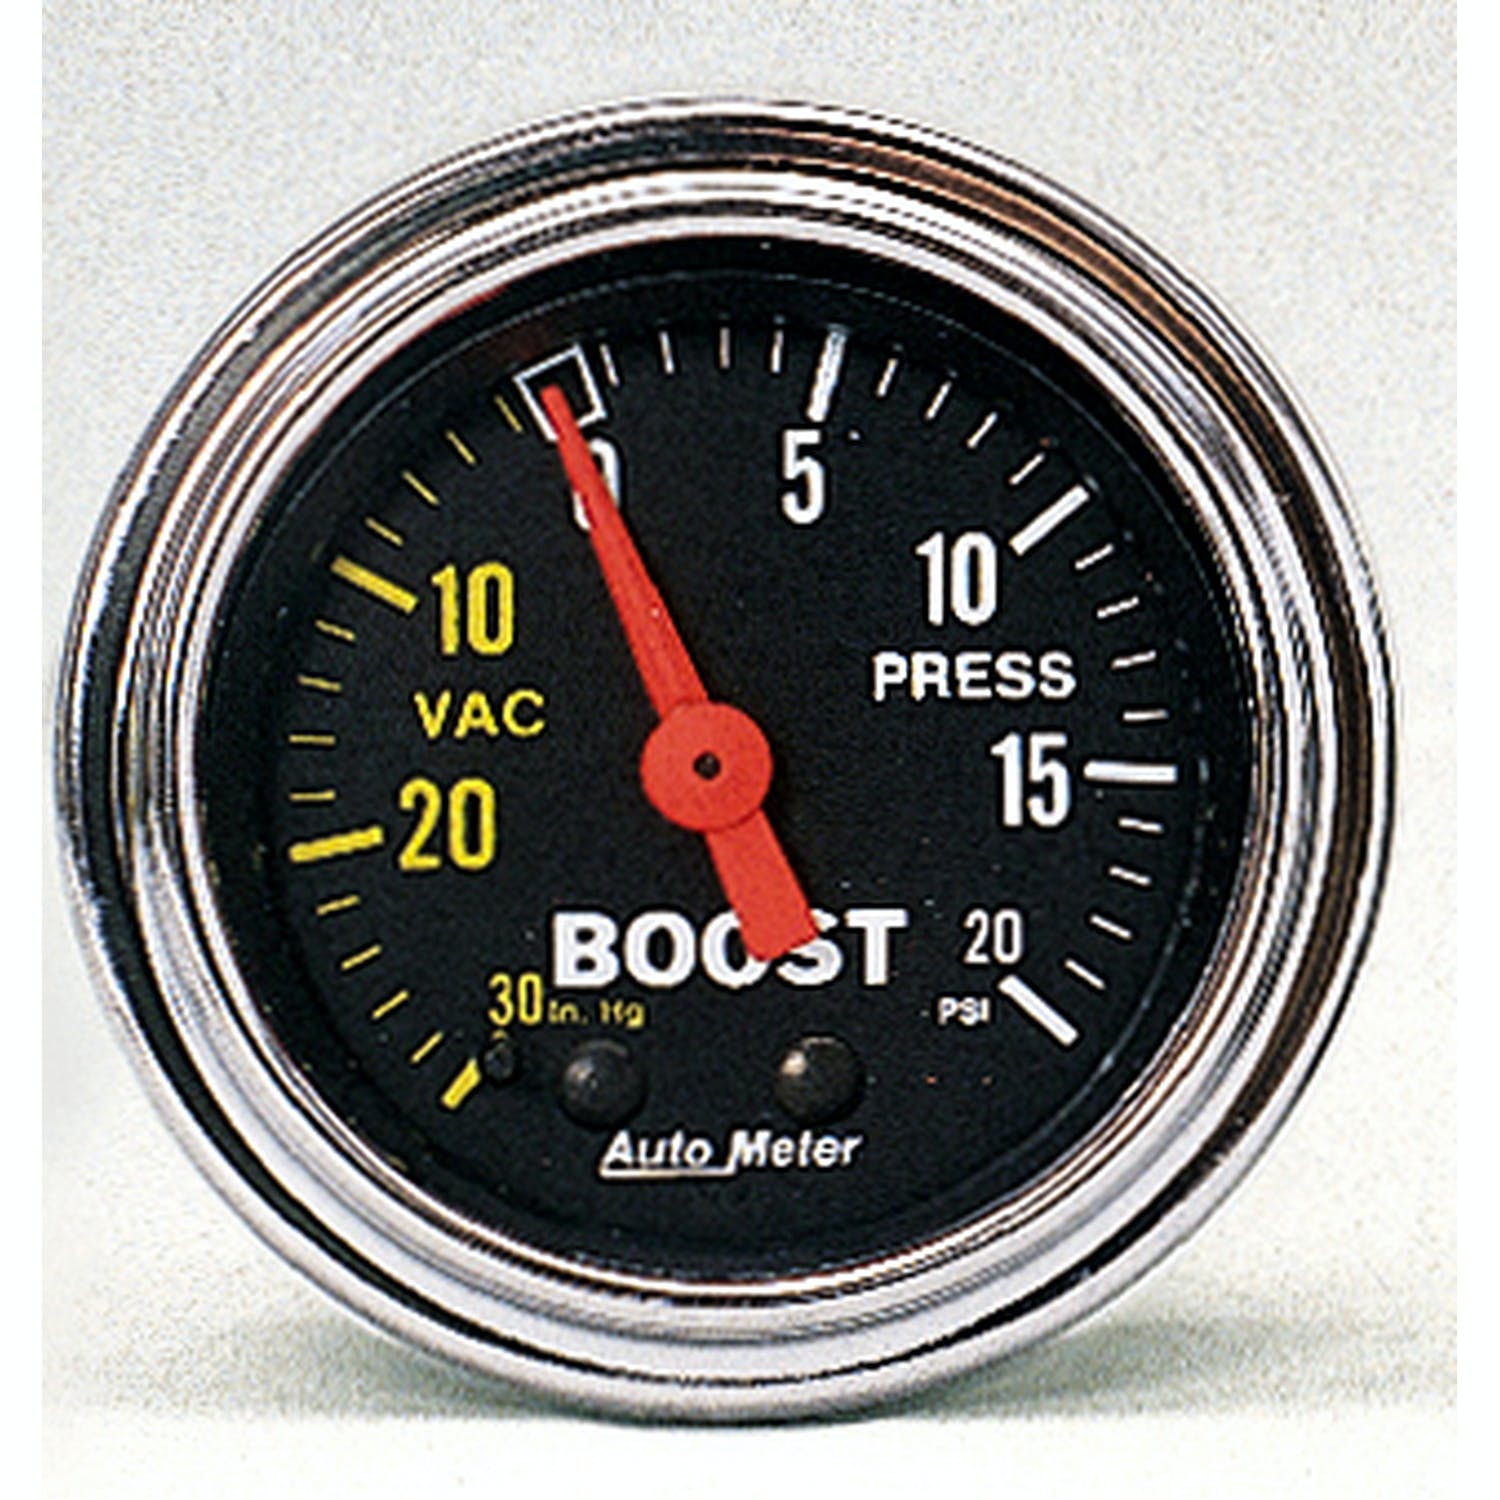 AutoMeter Products 2401 Boost/Vac 30 In. Hg/20 PSI